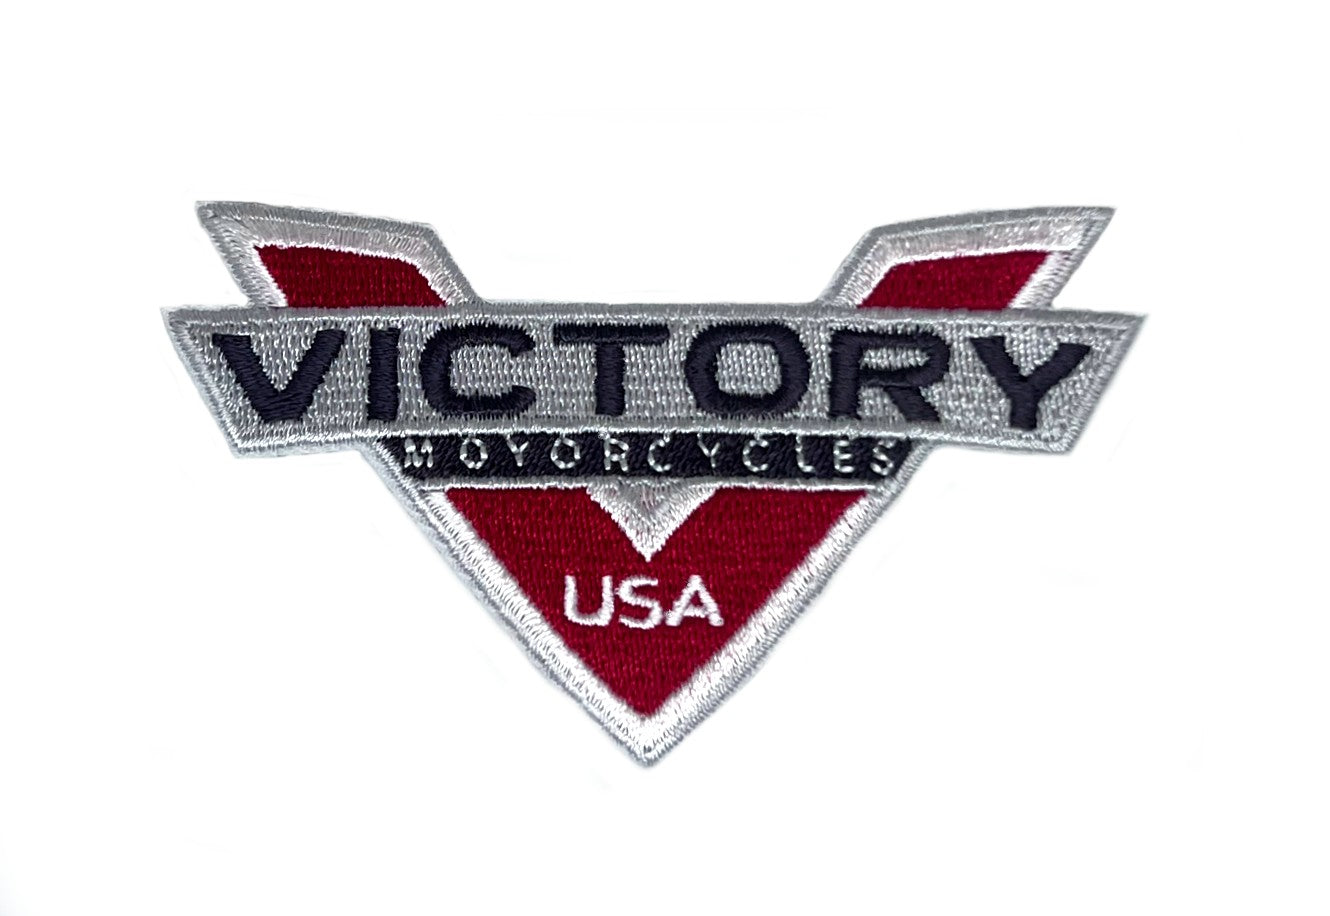 Victory Motorcycles Logo Patch (3.5 Inch) Iron/Sew-on Badge Perfect for Caps, Hats, Bags, Backpacks, Jackets, Shirts, Gift Patches